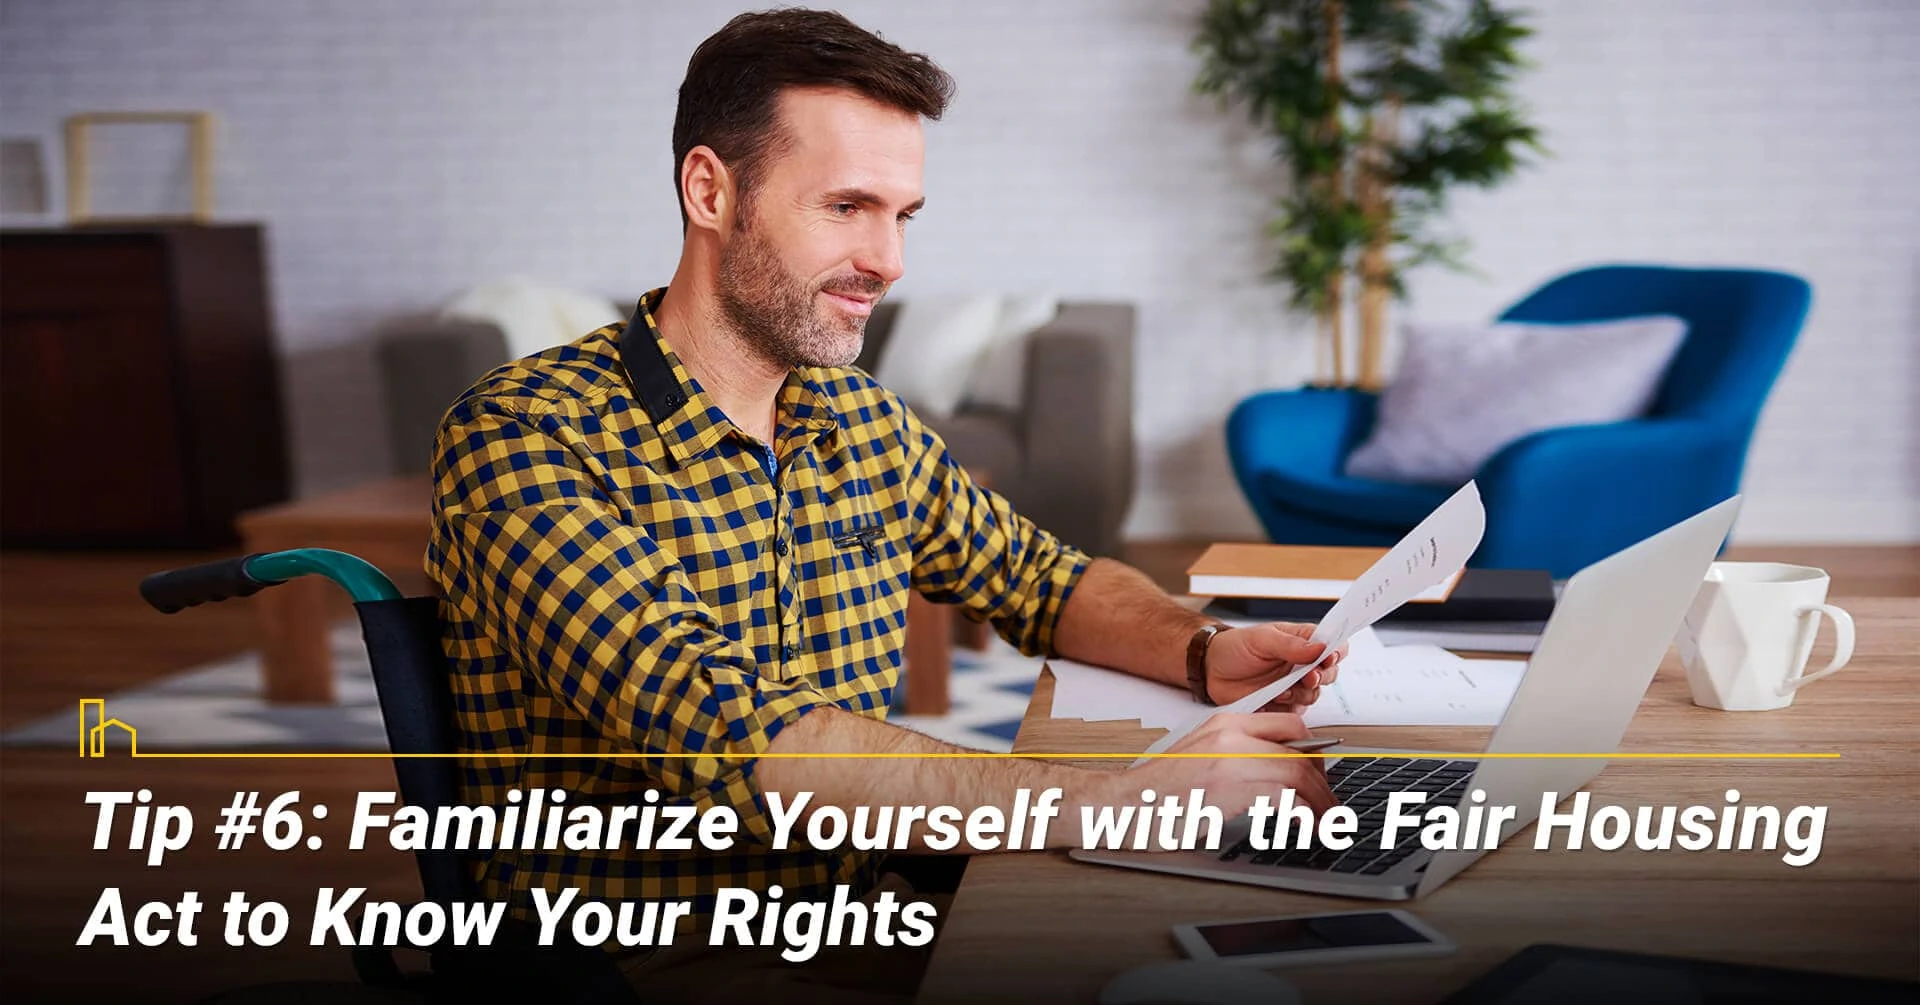 Tip #6: Familiarize Yourself with the Fair Housing Act to Know Your Rights, know the laws and aware of your rights